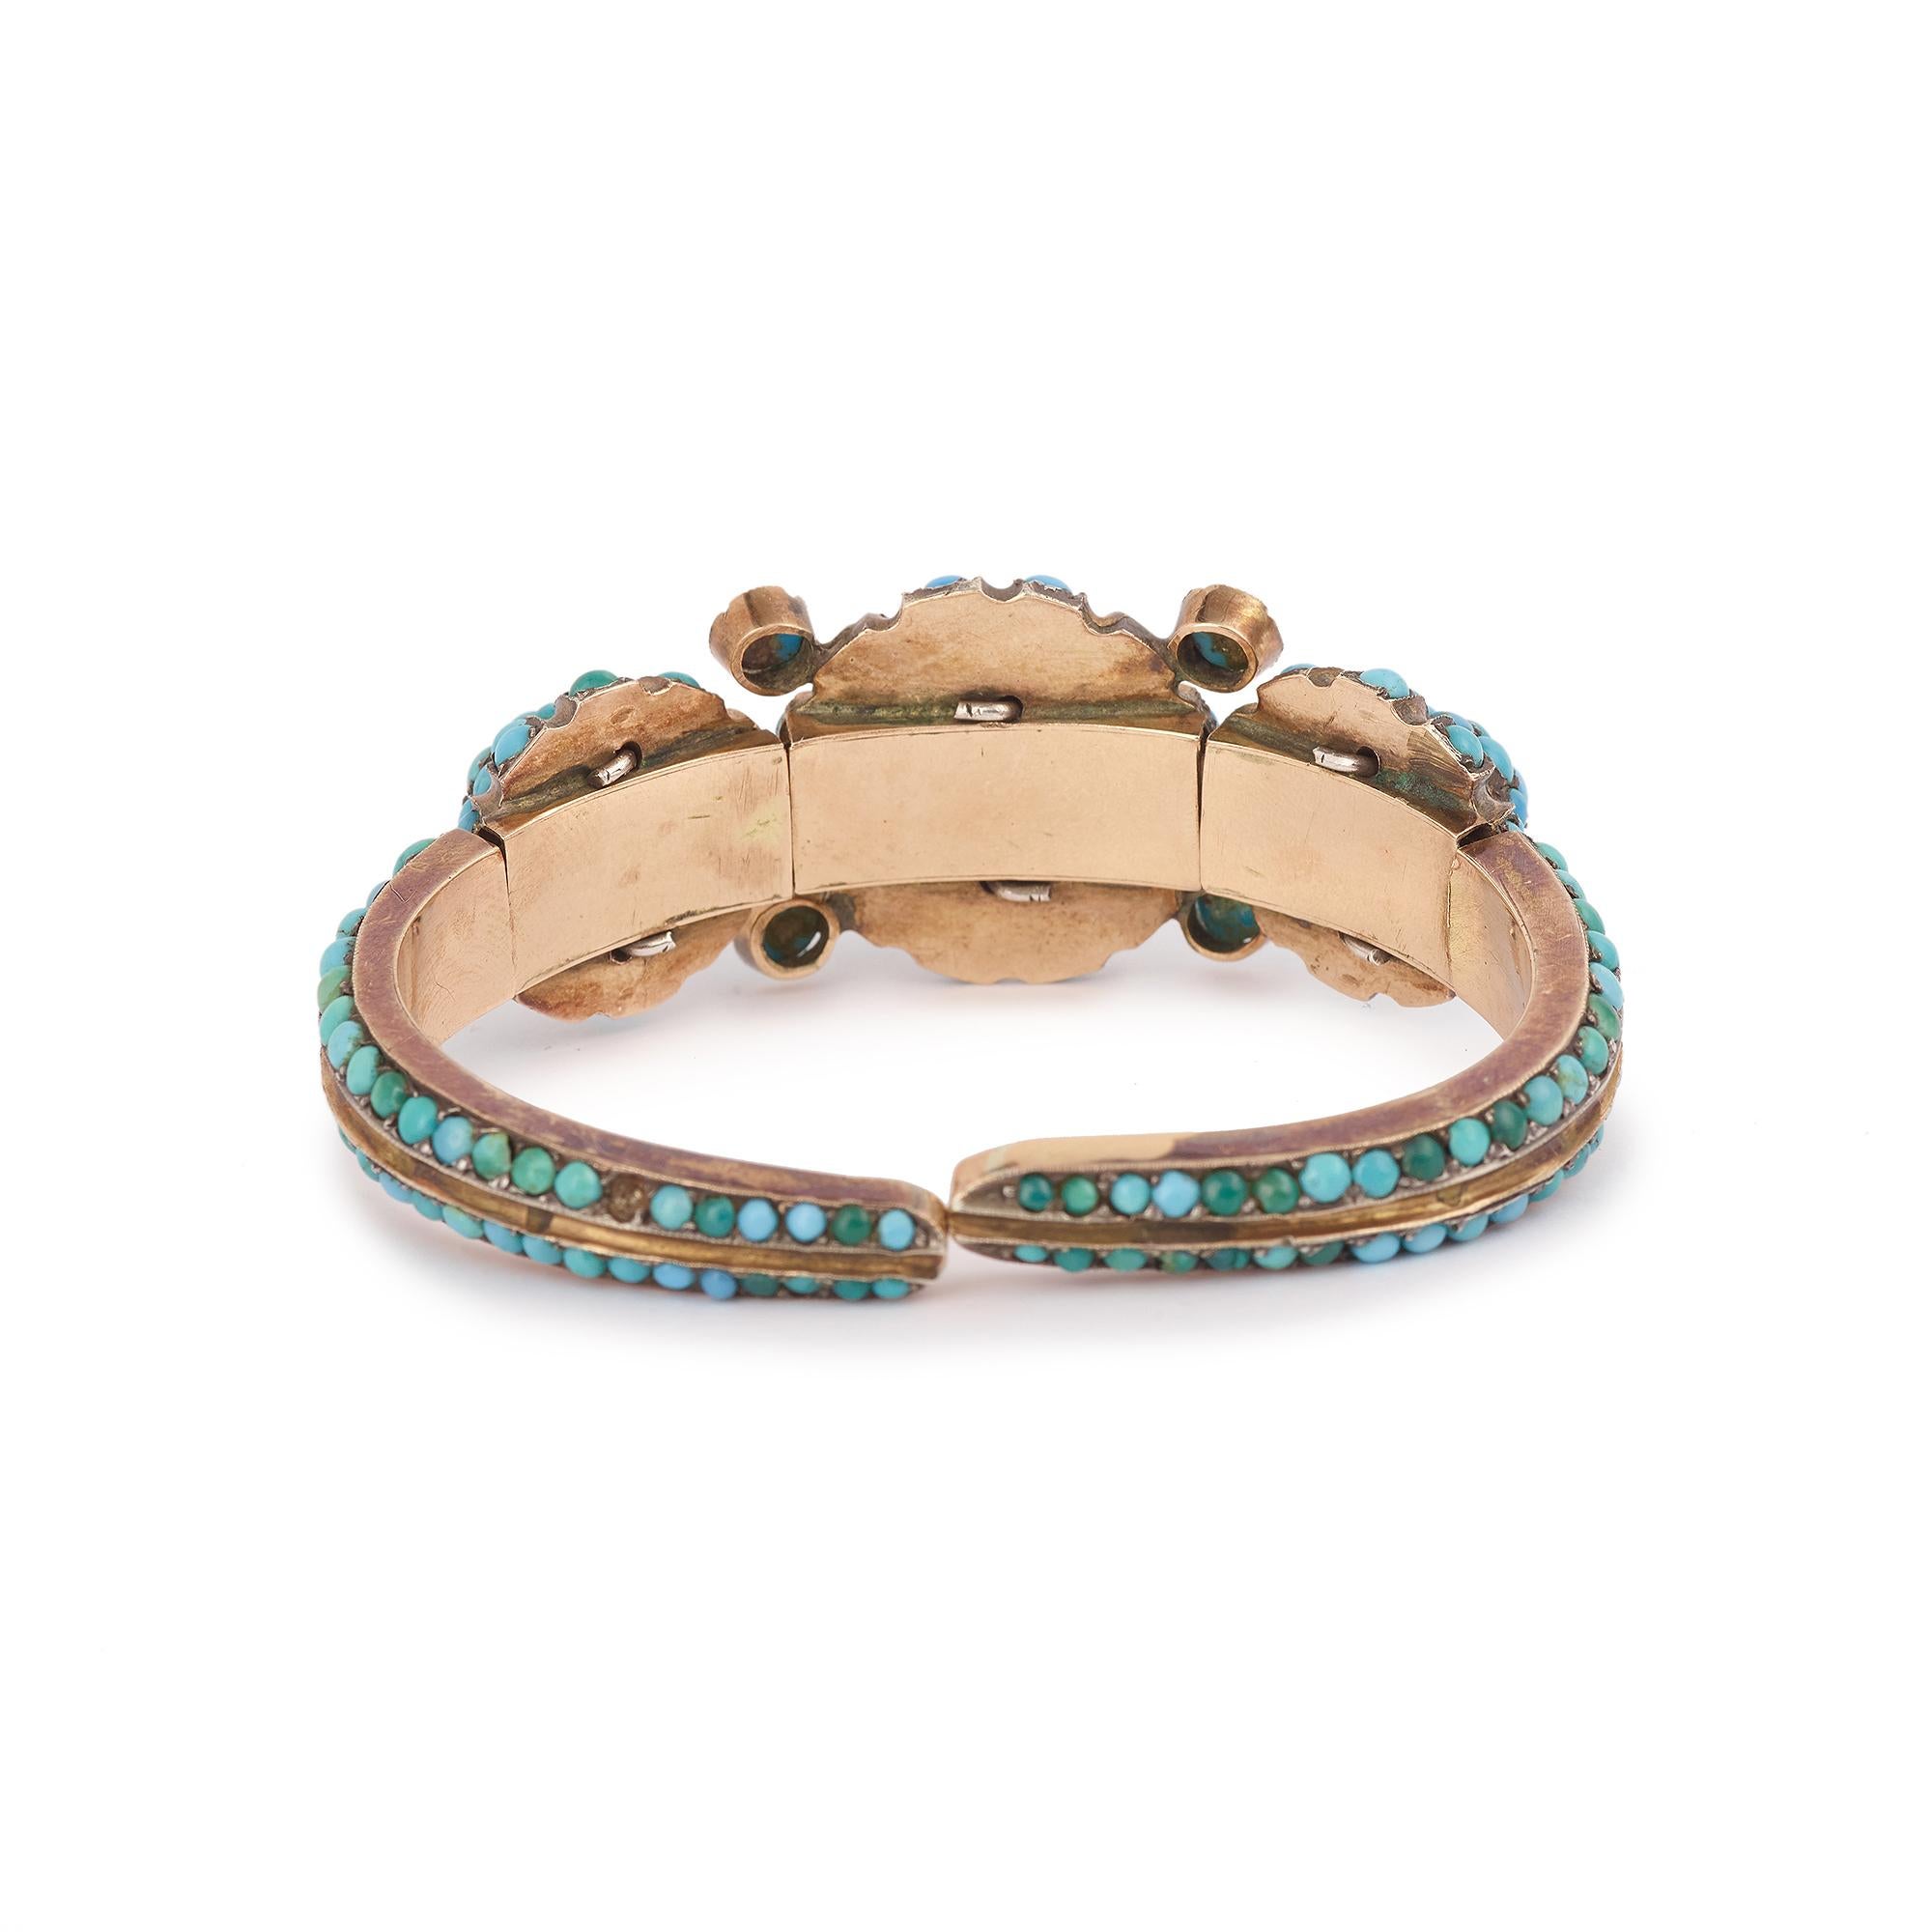 Victorian gold-plated bracelet set with a multitude of cabochon turquoise stones.

2 very small turquoises are missing on the back of the bracelet

Dimensions bracelet : 2.4 x 5.5 x 1.41 cm, (0.941 x 2.171 x 0.555 inch)

Weight bracelet: 63 g

Wrist